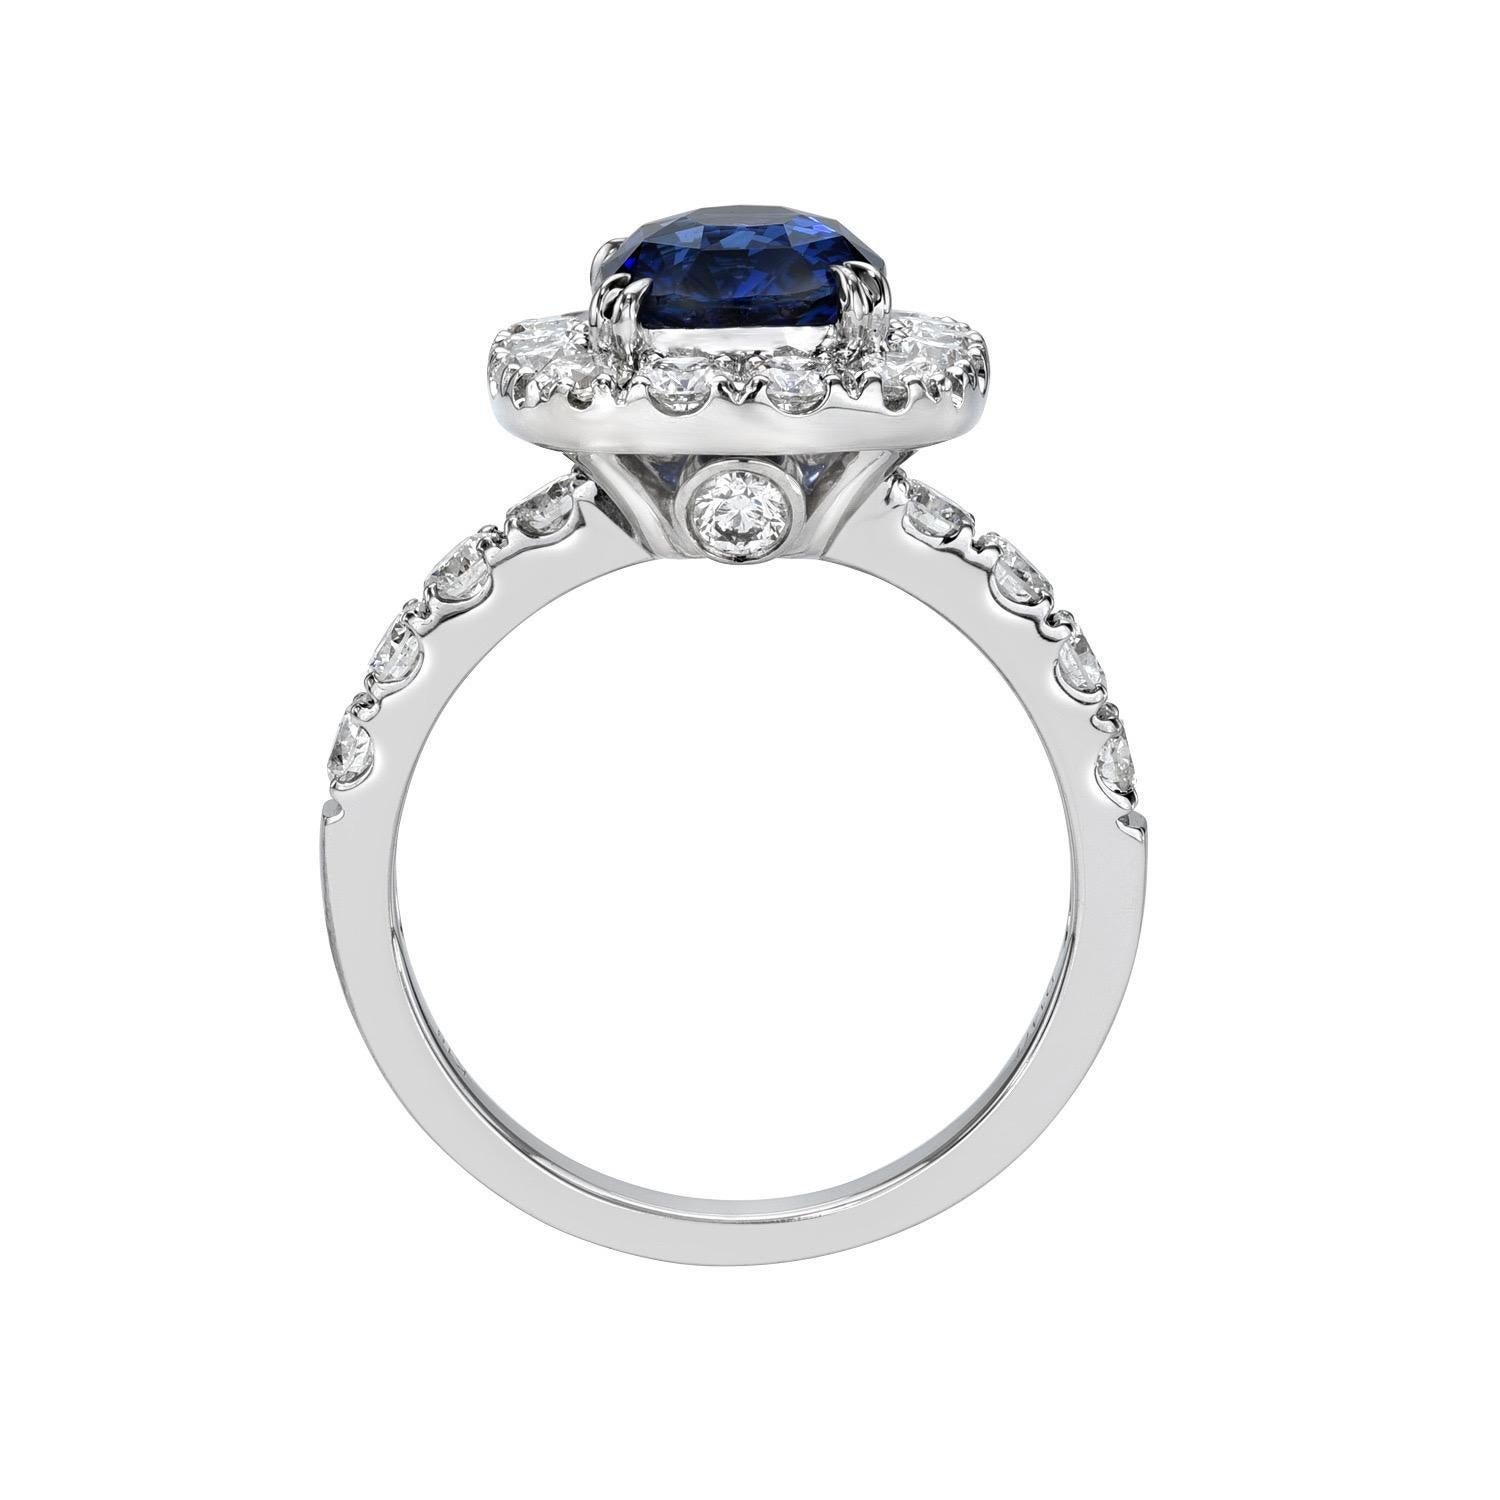 Contemporary Sapphire Ring 2.71 Carat Cushion Engagement Ring